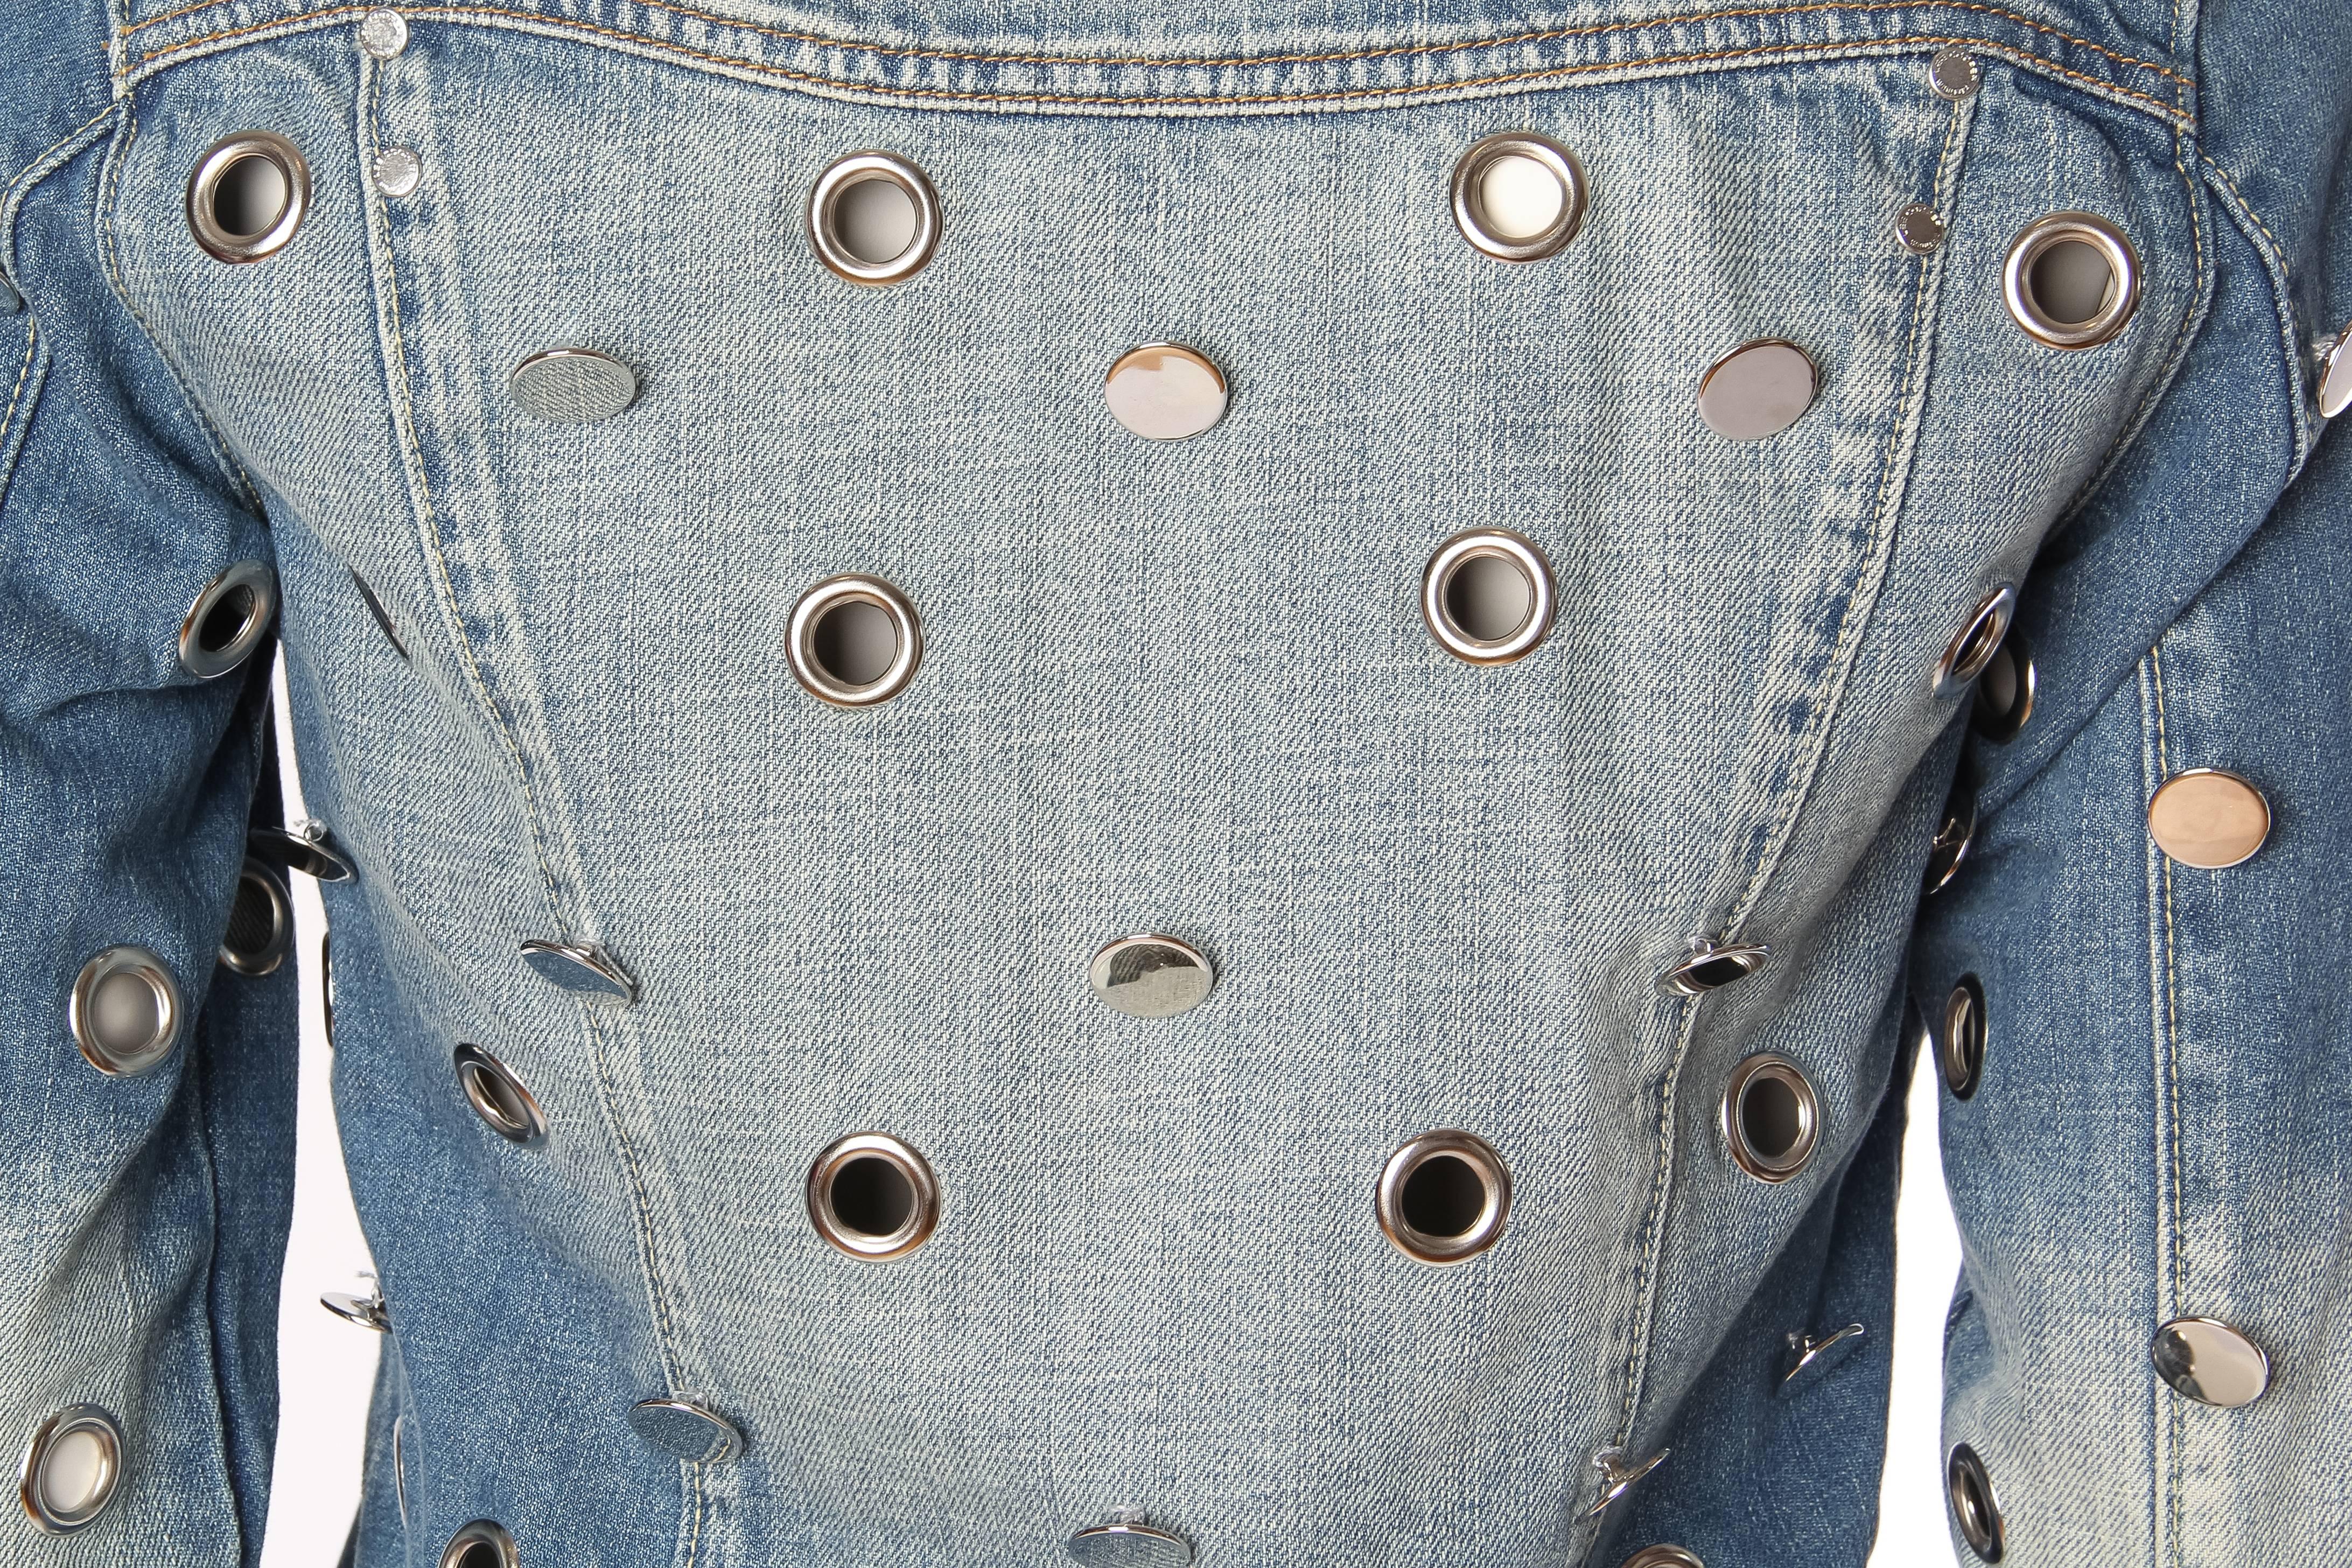 Denim Jacket Covered in Mirrored Buttons and Gromets 5